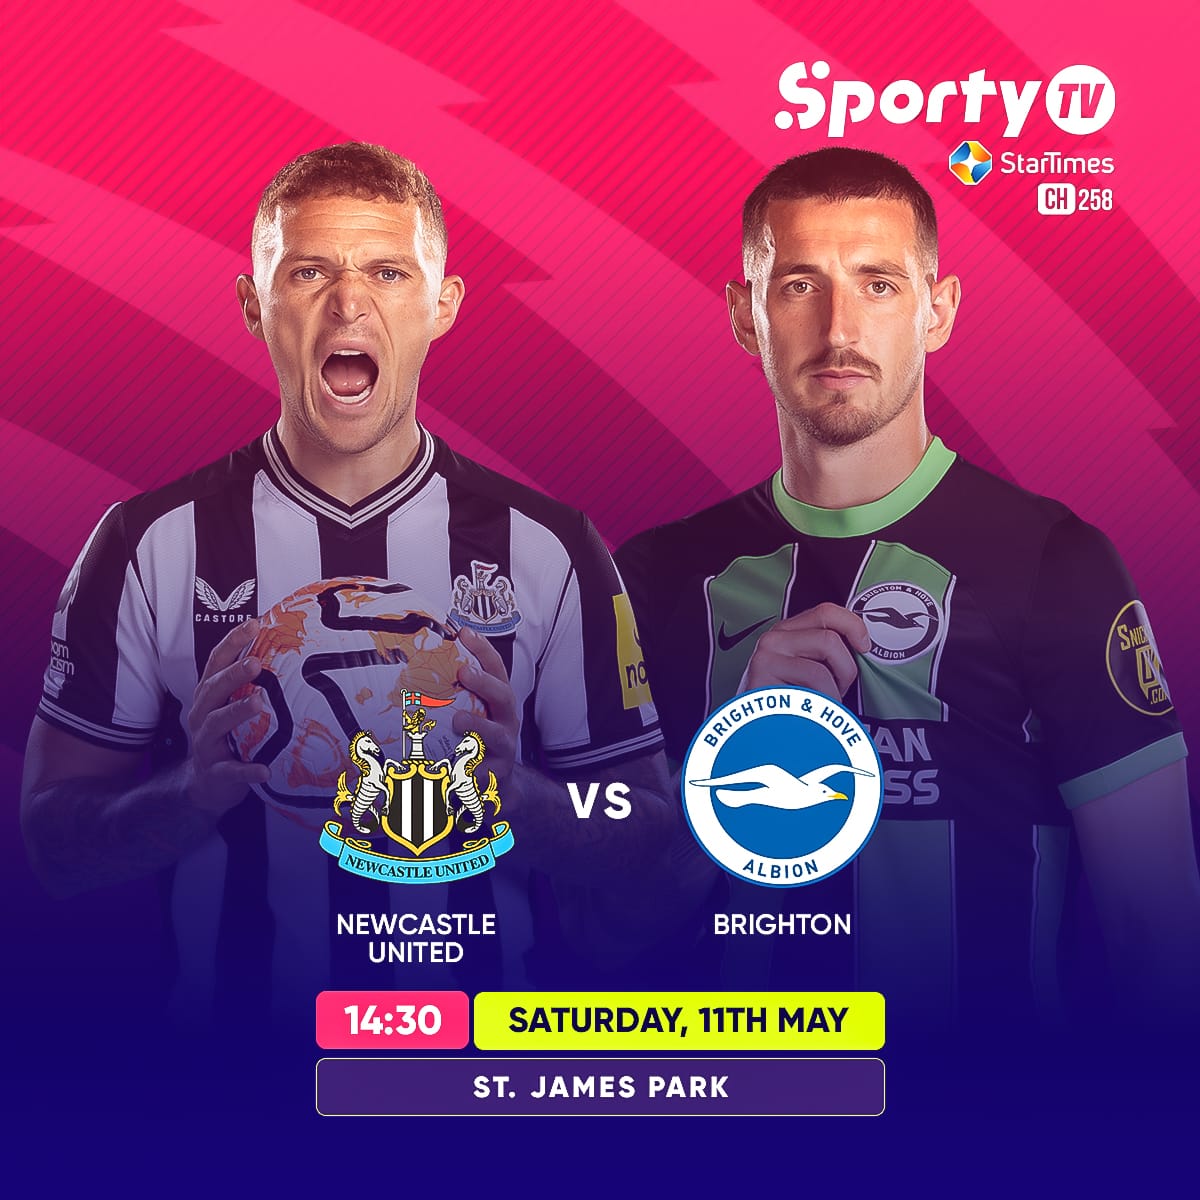 Newcastle faces Brighton today, May 11 at James Park. Don't miss the EPL action showing at 2:30pm, on Sporty TV CH. 258 #football #epl #newcastle #brighton